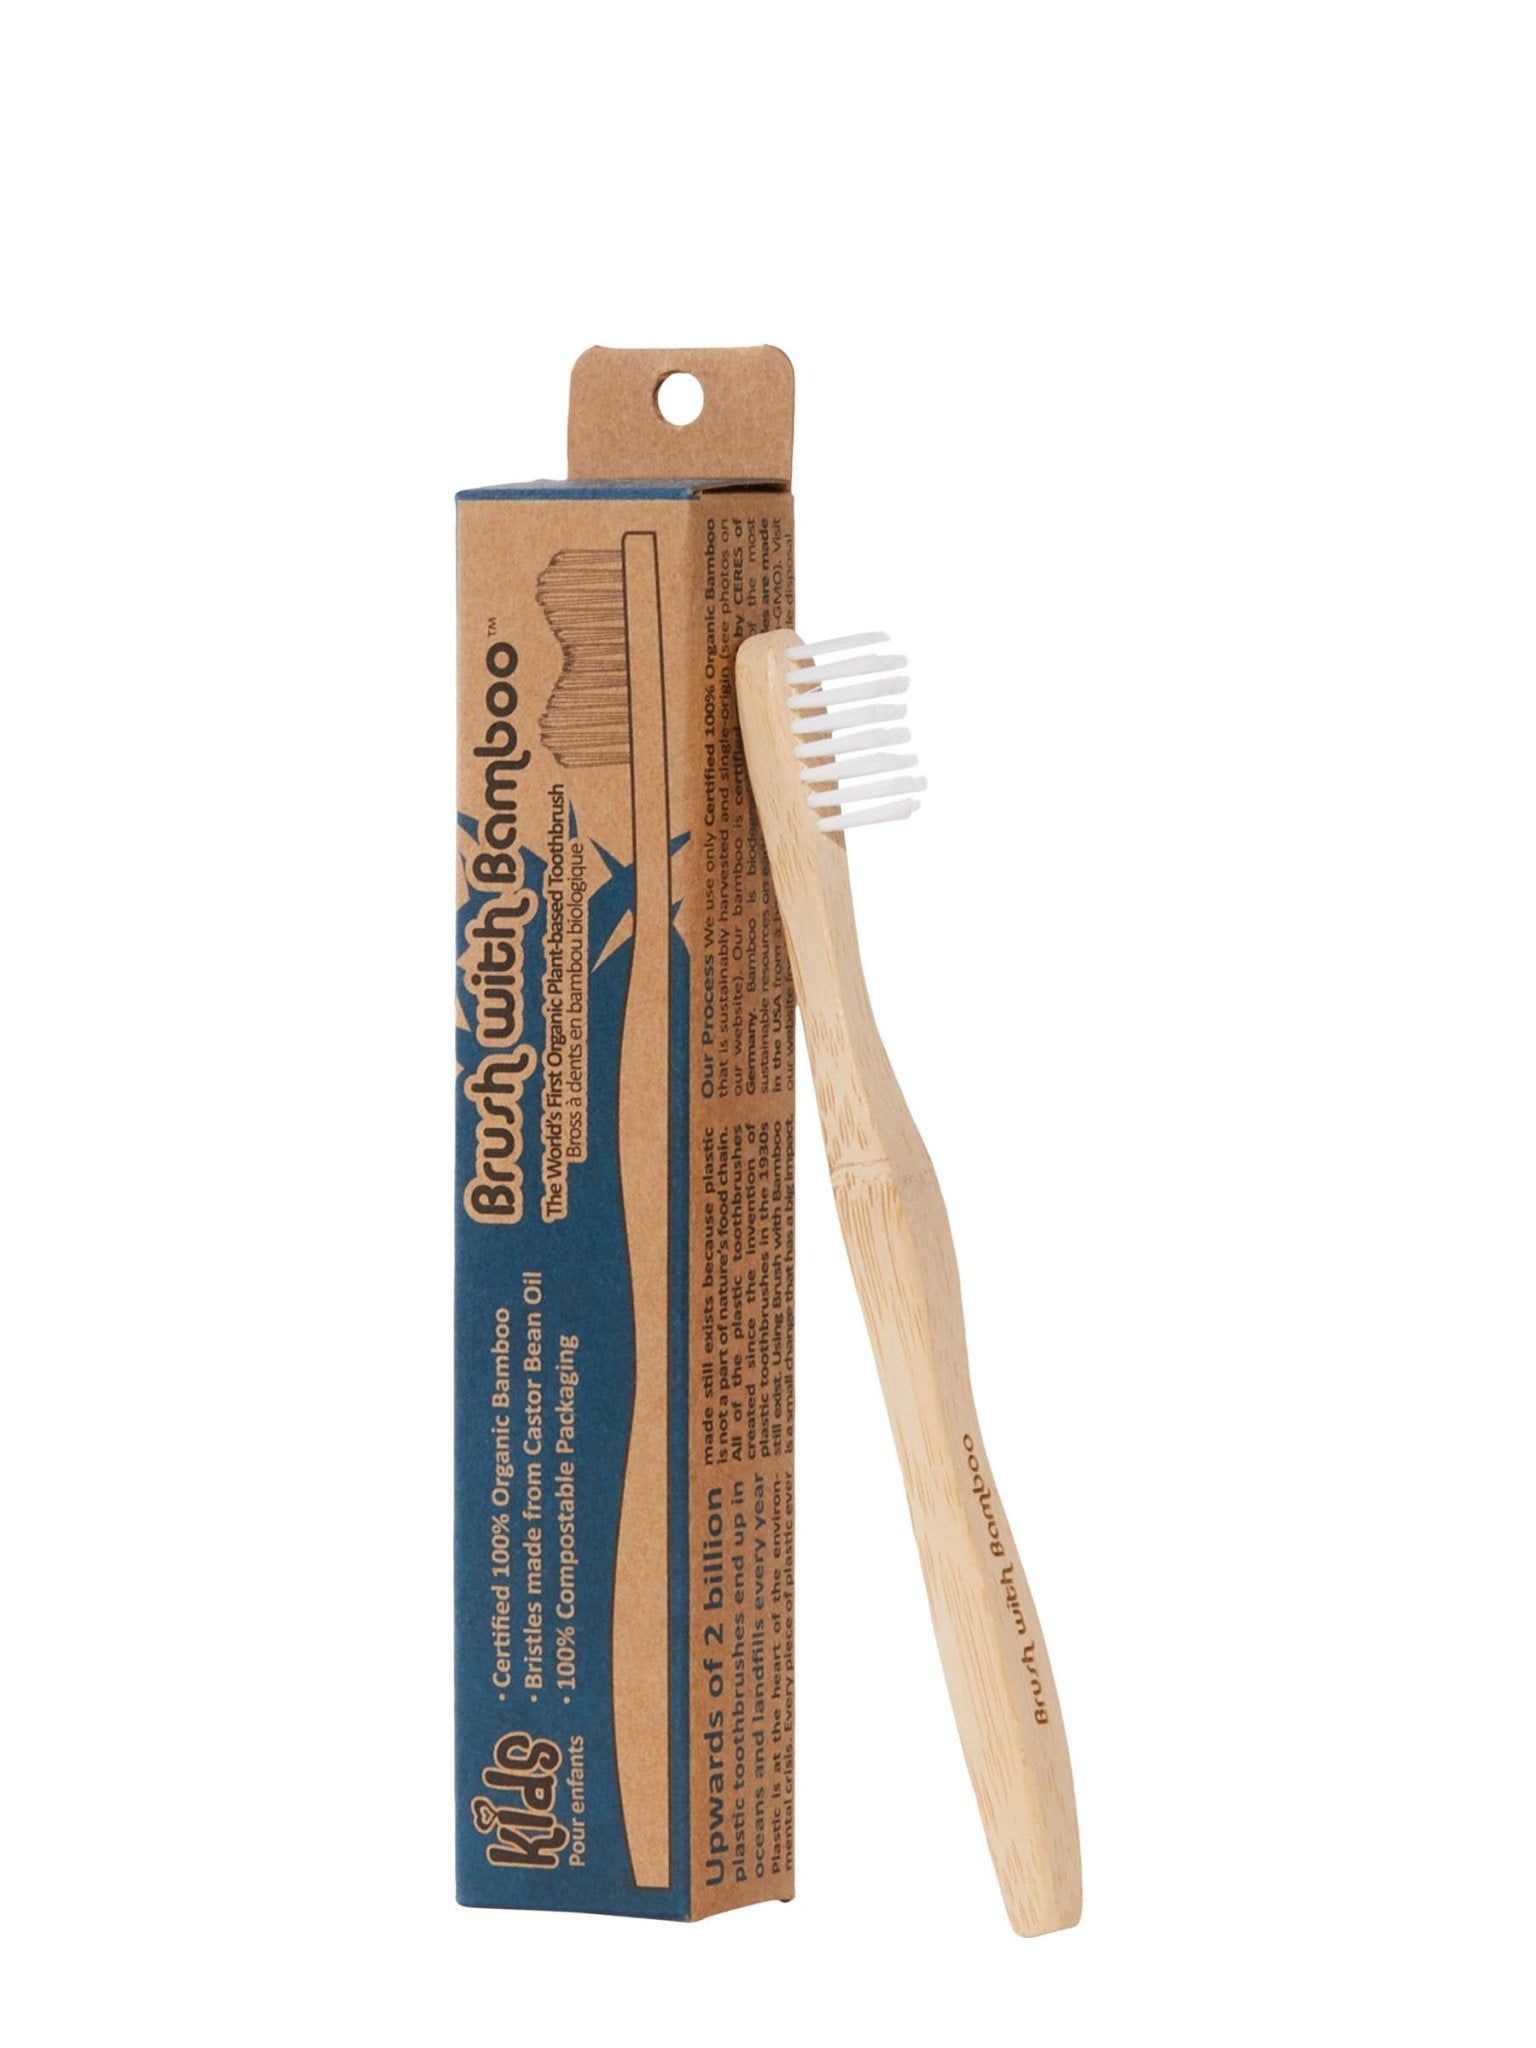 Kids Toothbrush with Biodegradable Handle & Bristles - Earth Ahead